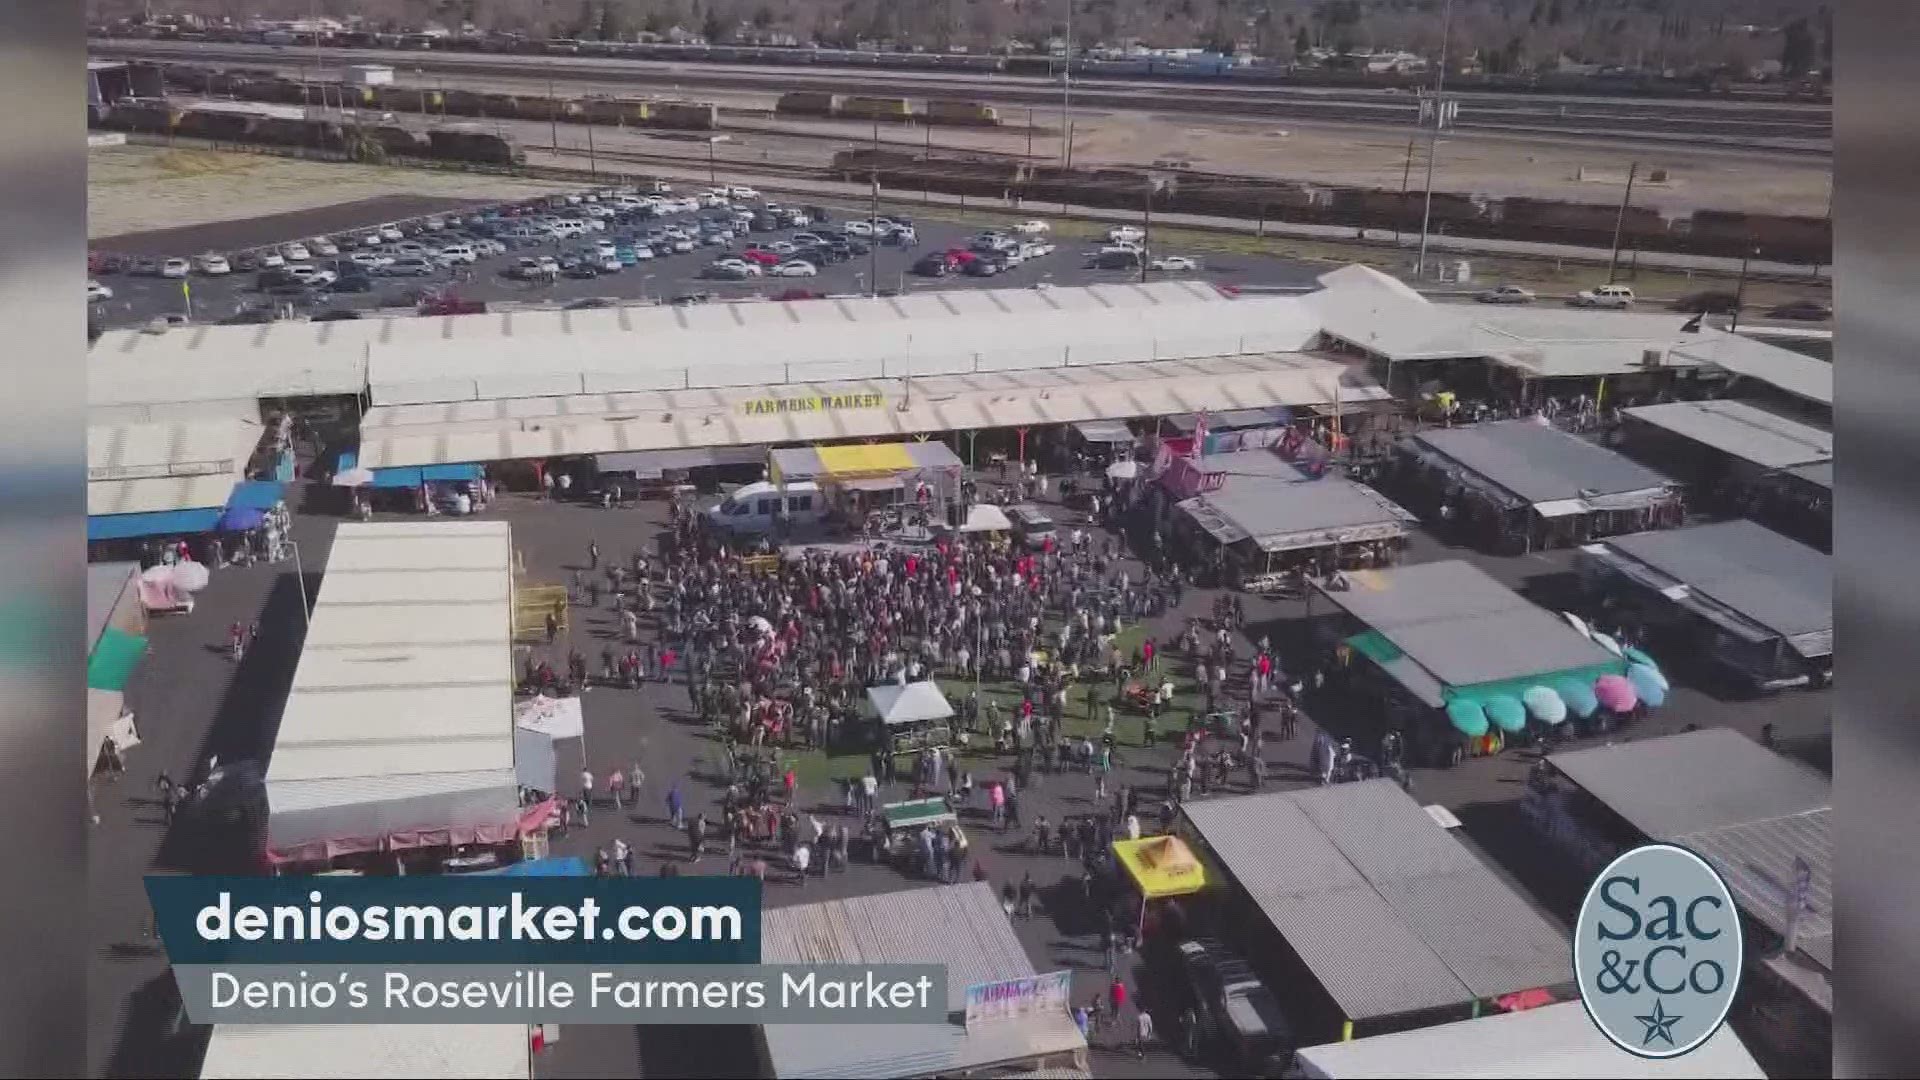 Denio's Farmers Market and Swap Meet in Roseville has a lot to offer the whole family! Here are some highlights! The following is a paid segment sponsored by Denio's Farmers Market and Swap Meet.